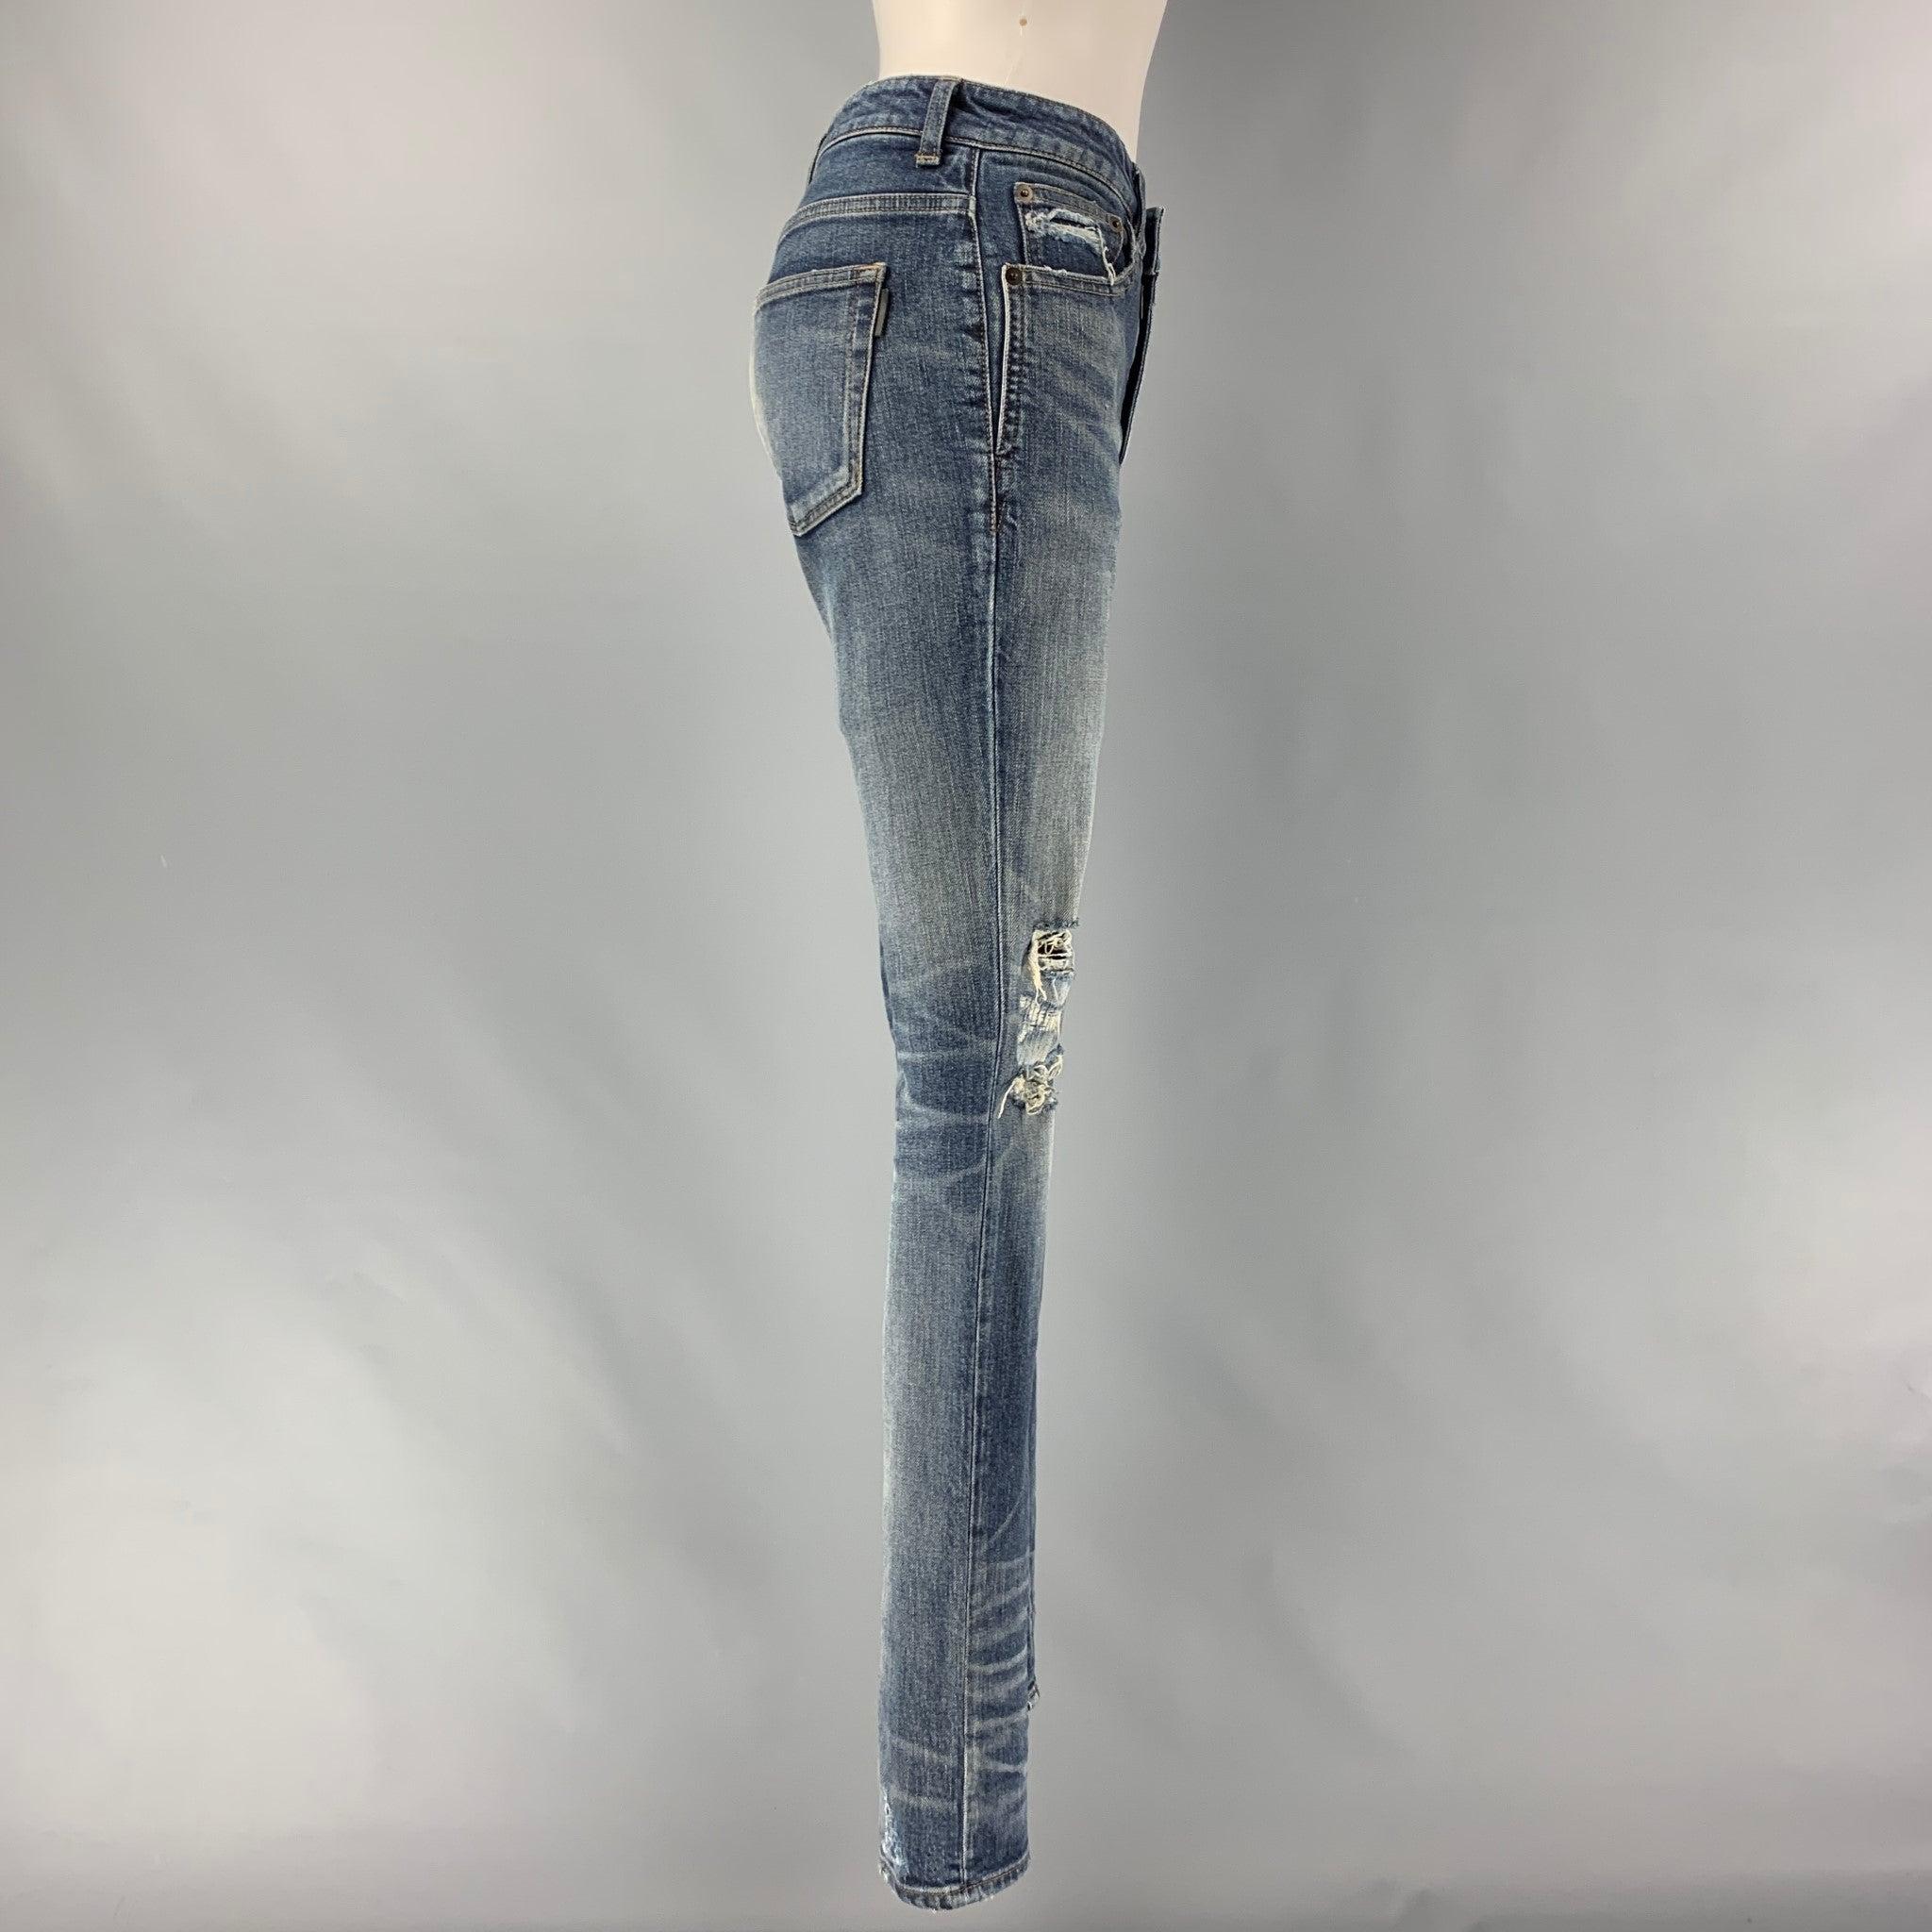 SAINT LAURENT skinny casual jeans comes in a light blue cotton and elastane washed denim featuring distressed style, five pockets, zip fly closure. Made in Japan.Very Good Pre-Owned Condition. Minor Signs of Wear. 

Marked:   26 

Measurements: 
 